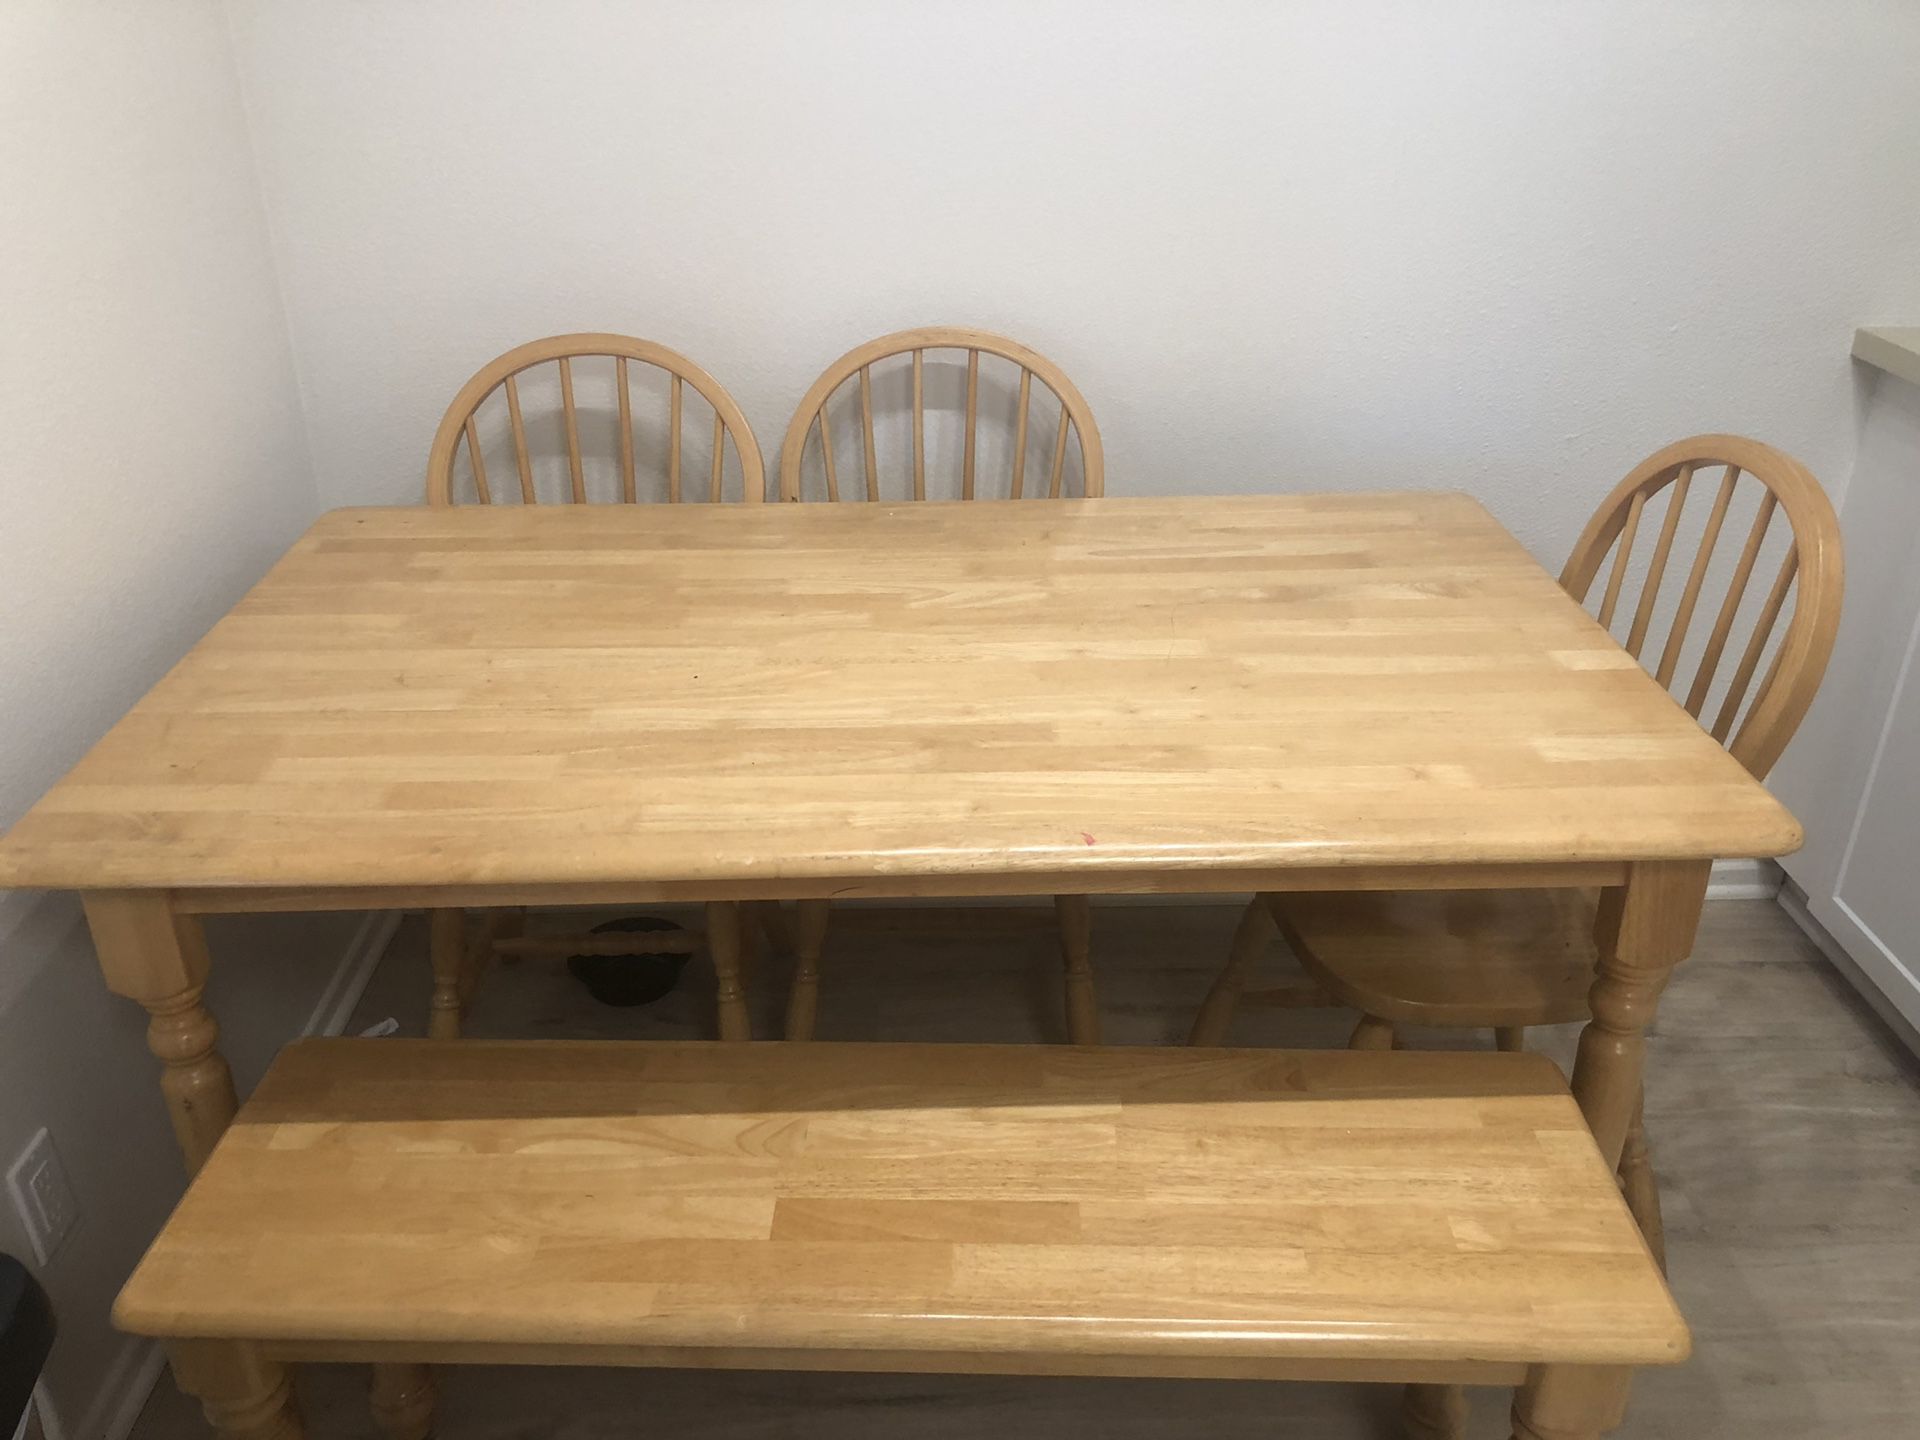 Wooden rectangle kitchen table